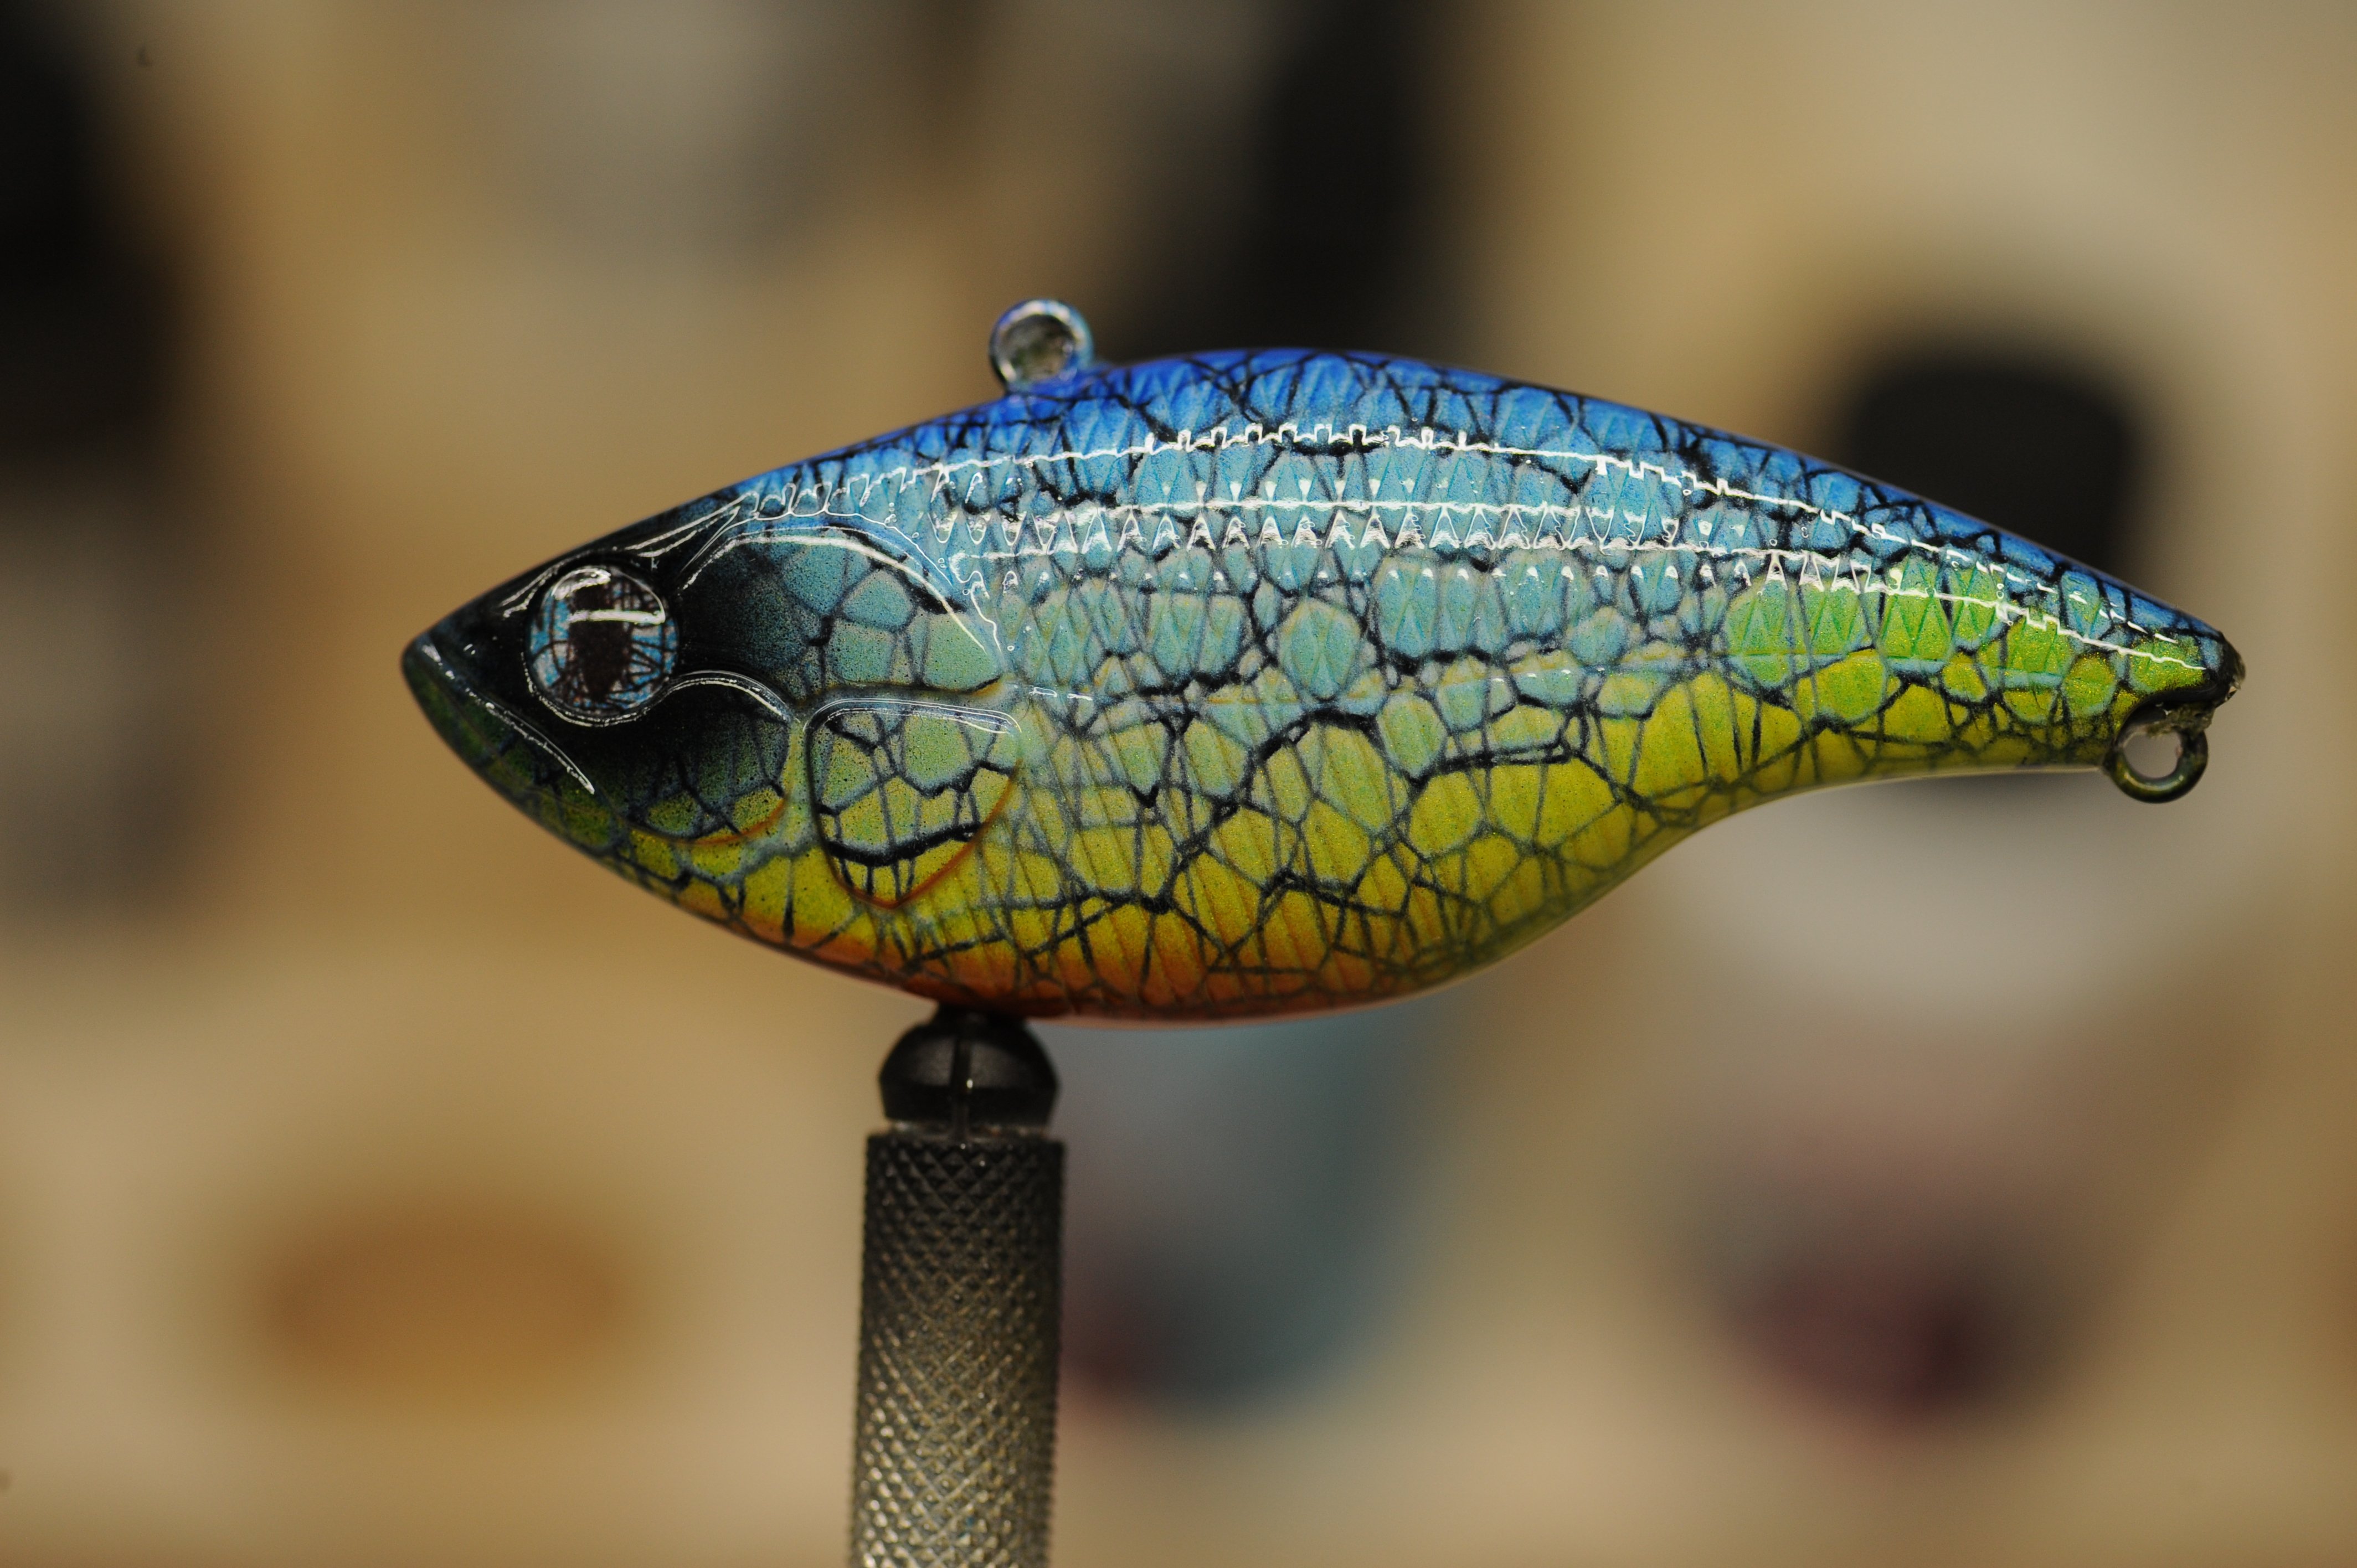 Best Airbrush Paint for Fishing Lures - Metastate Paint